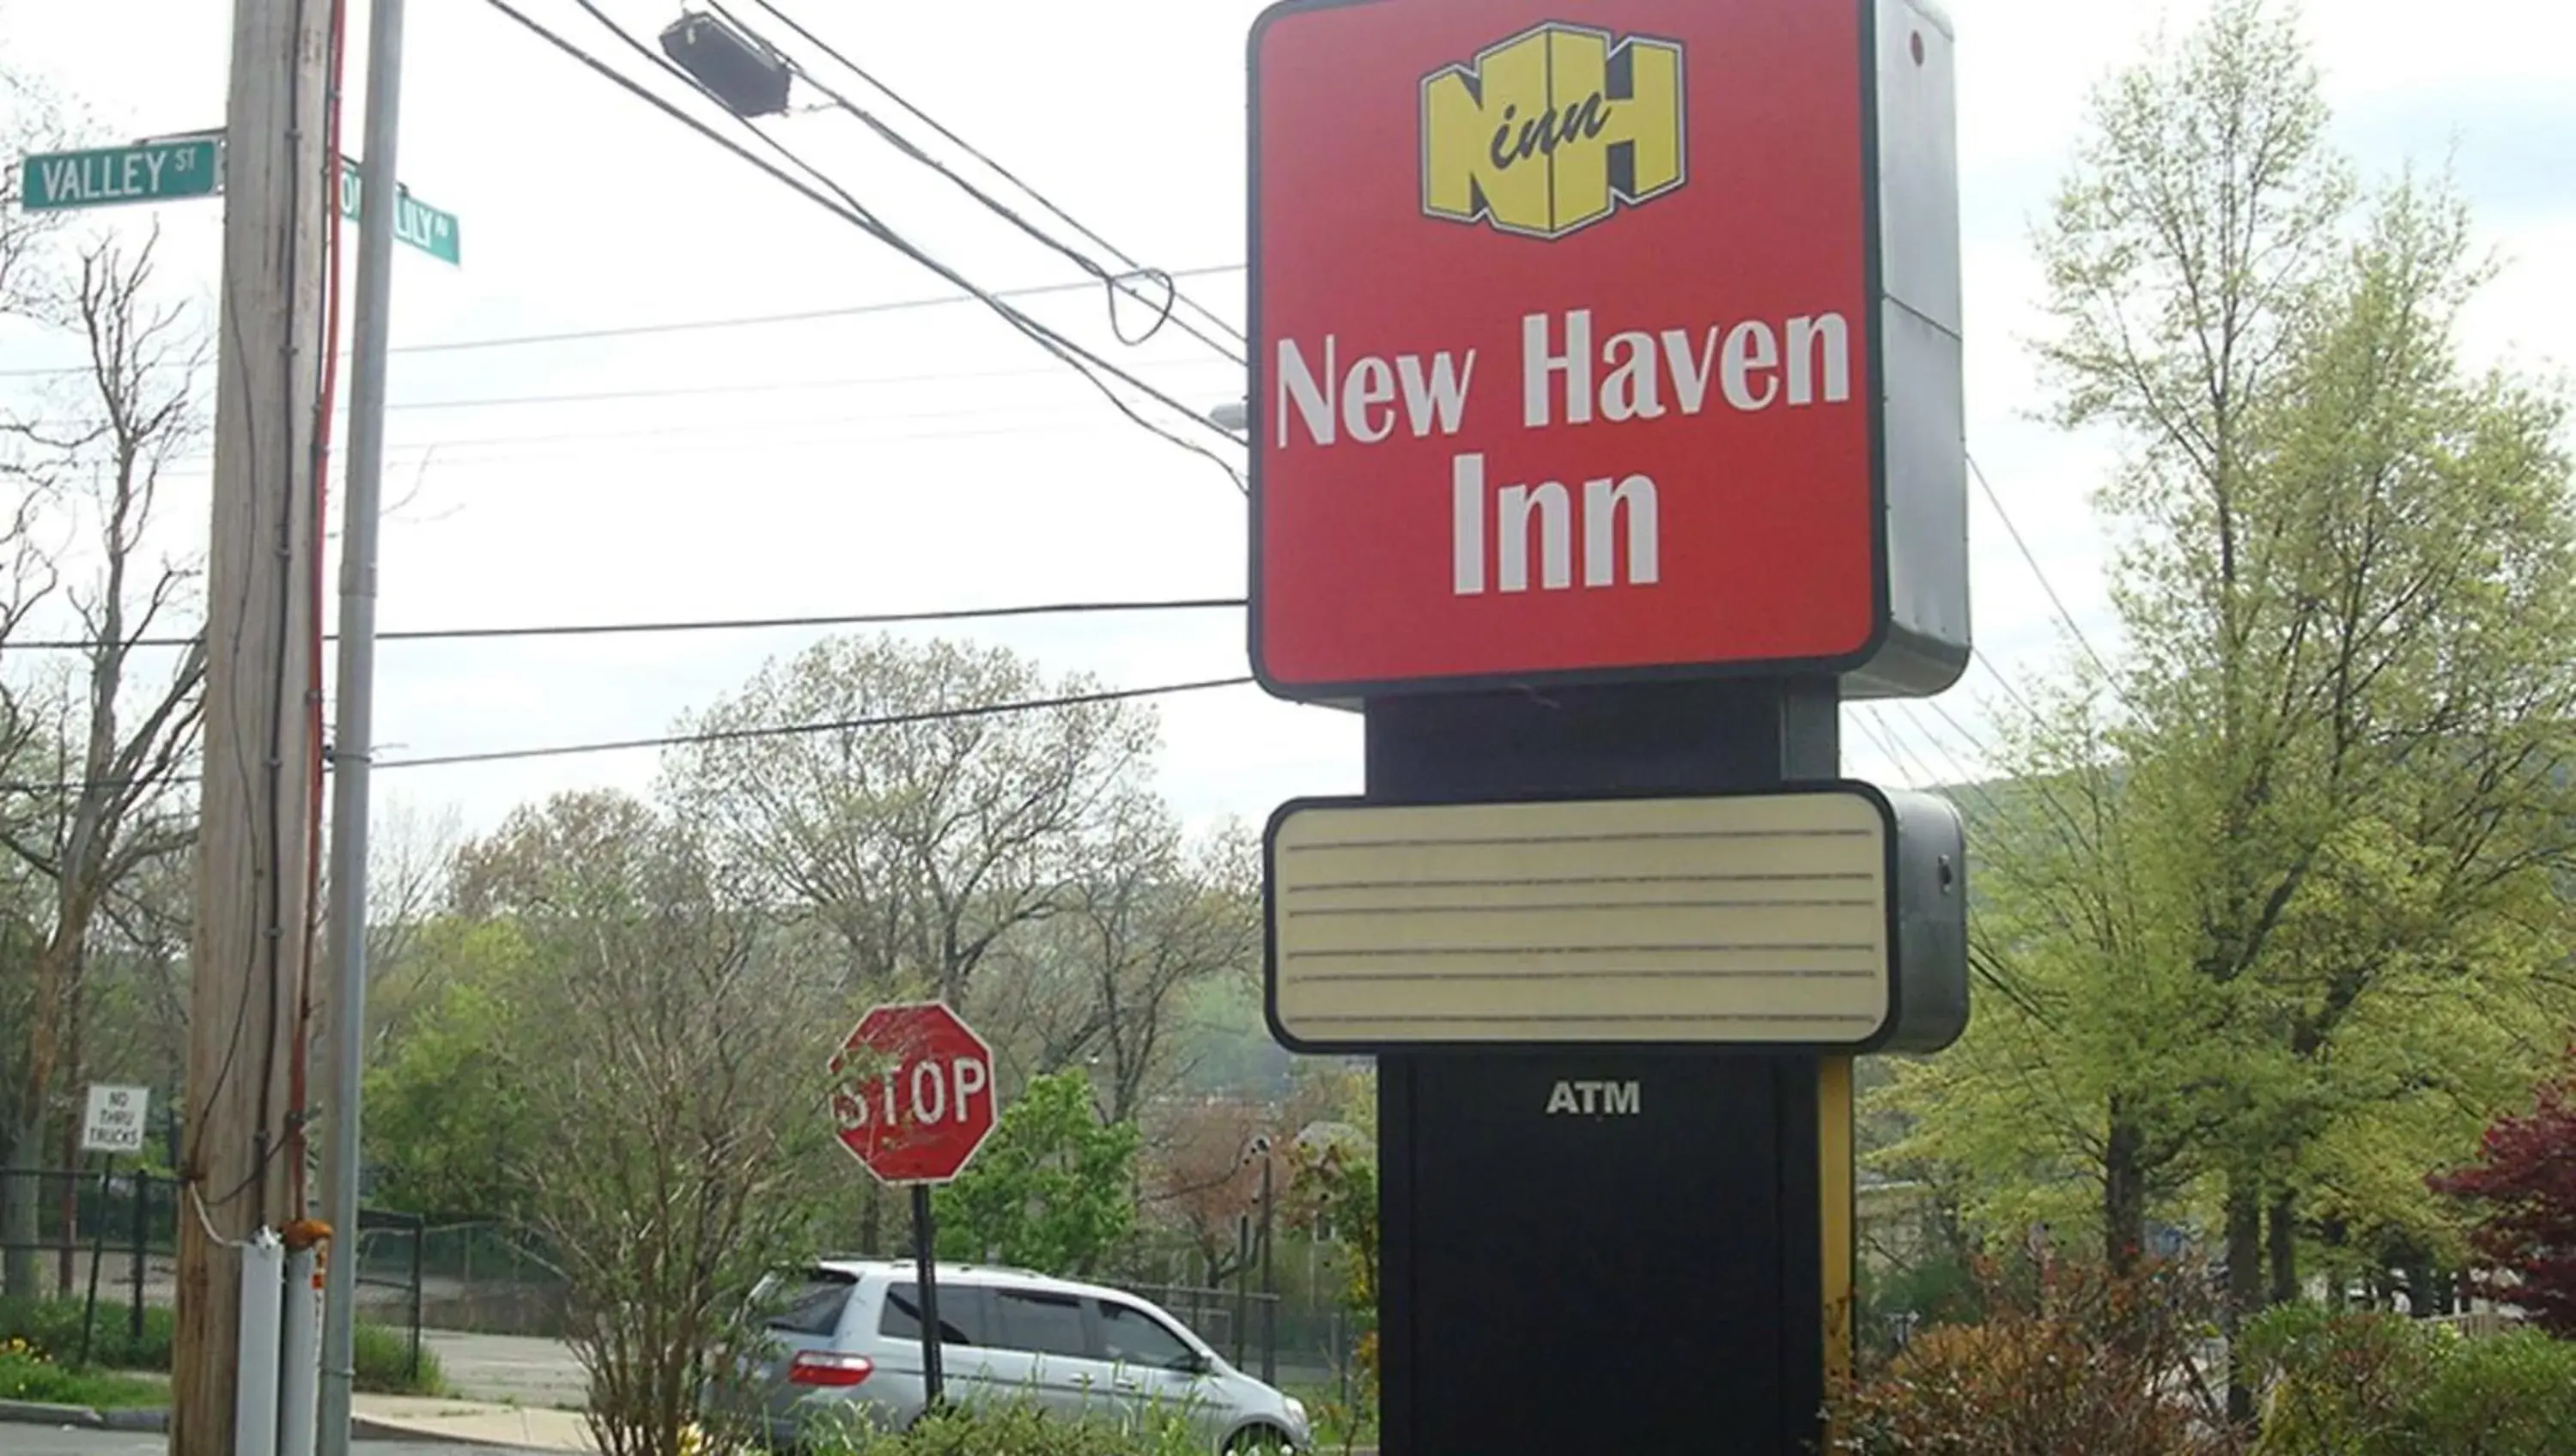 Property building in New Haven Inn